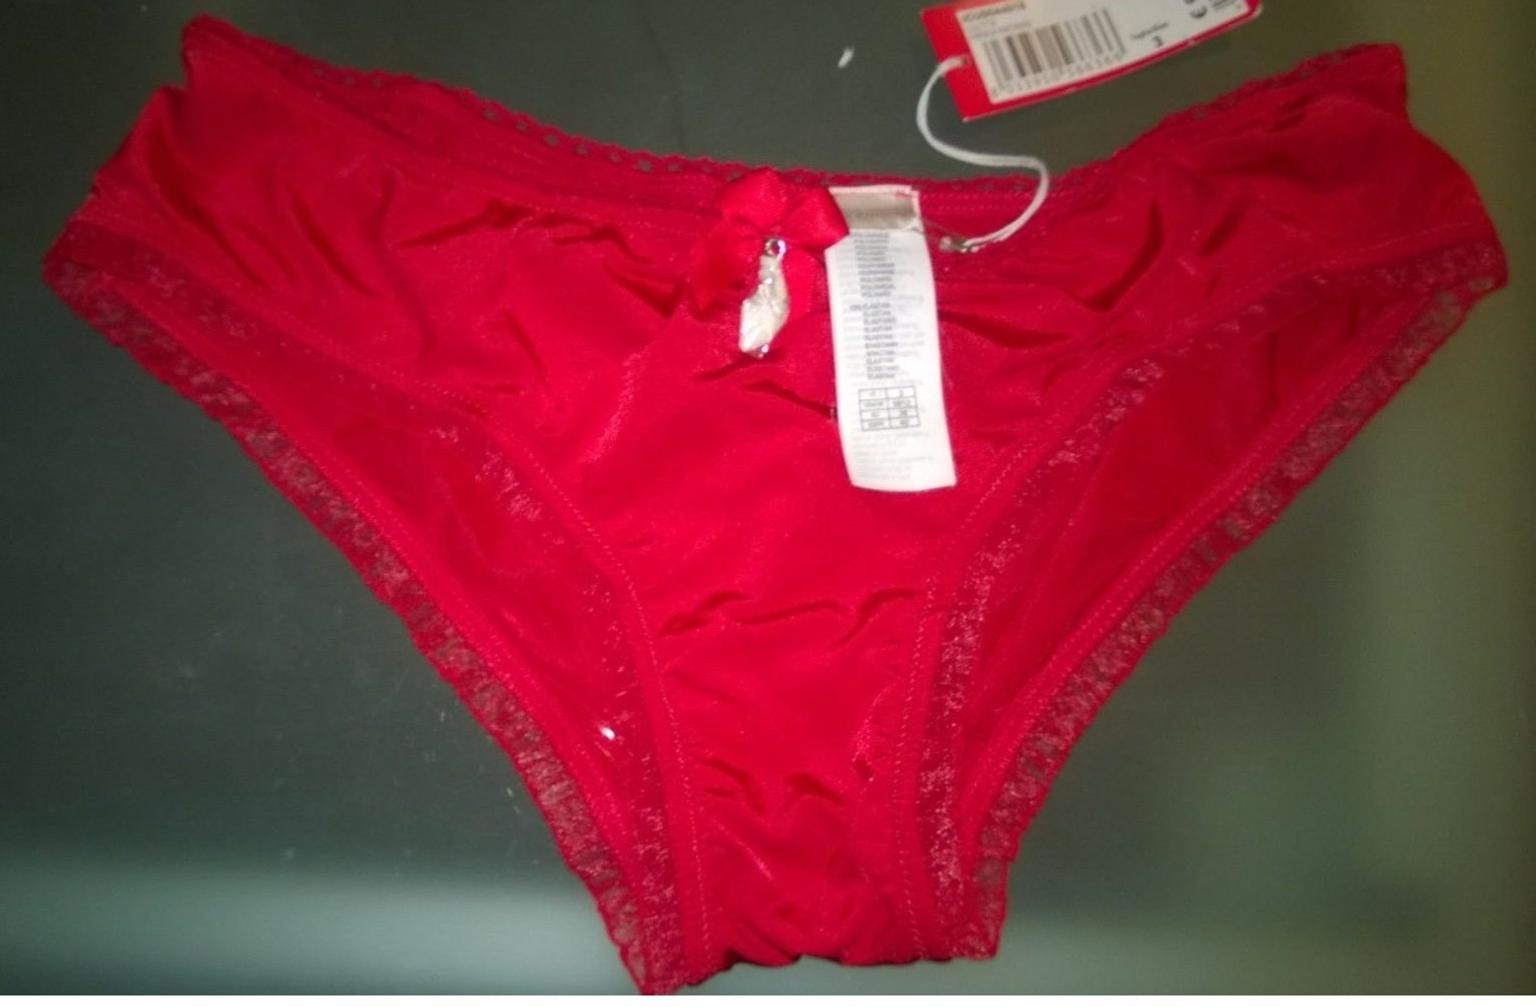 Idee Regalo Natale Yamamay.Nuove Culotte Yamamay Beneauguranti Rosse 3a In 25215 Brescia For 5 00 For Sale Shpock